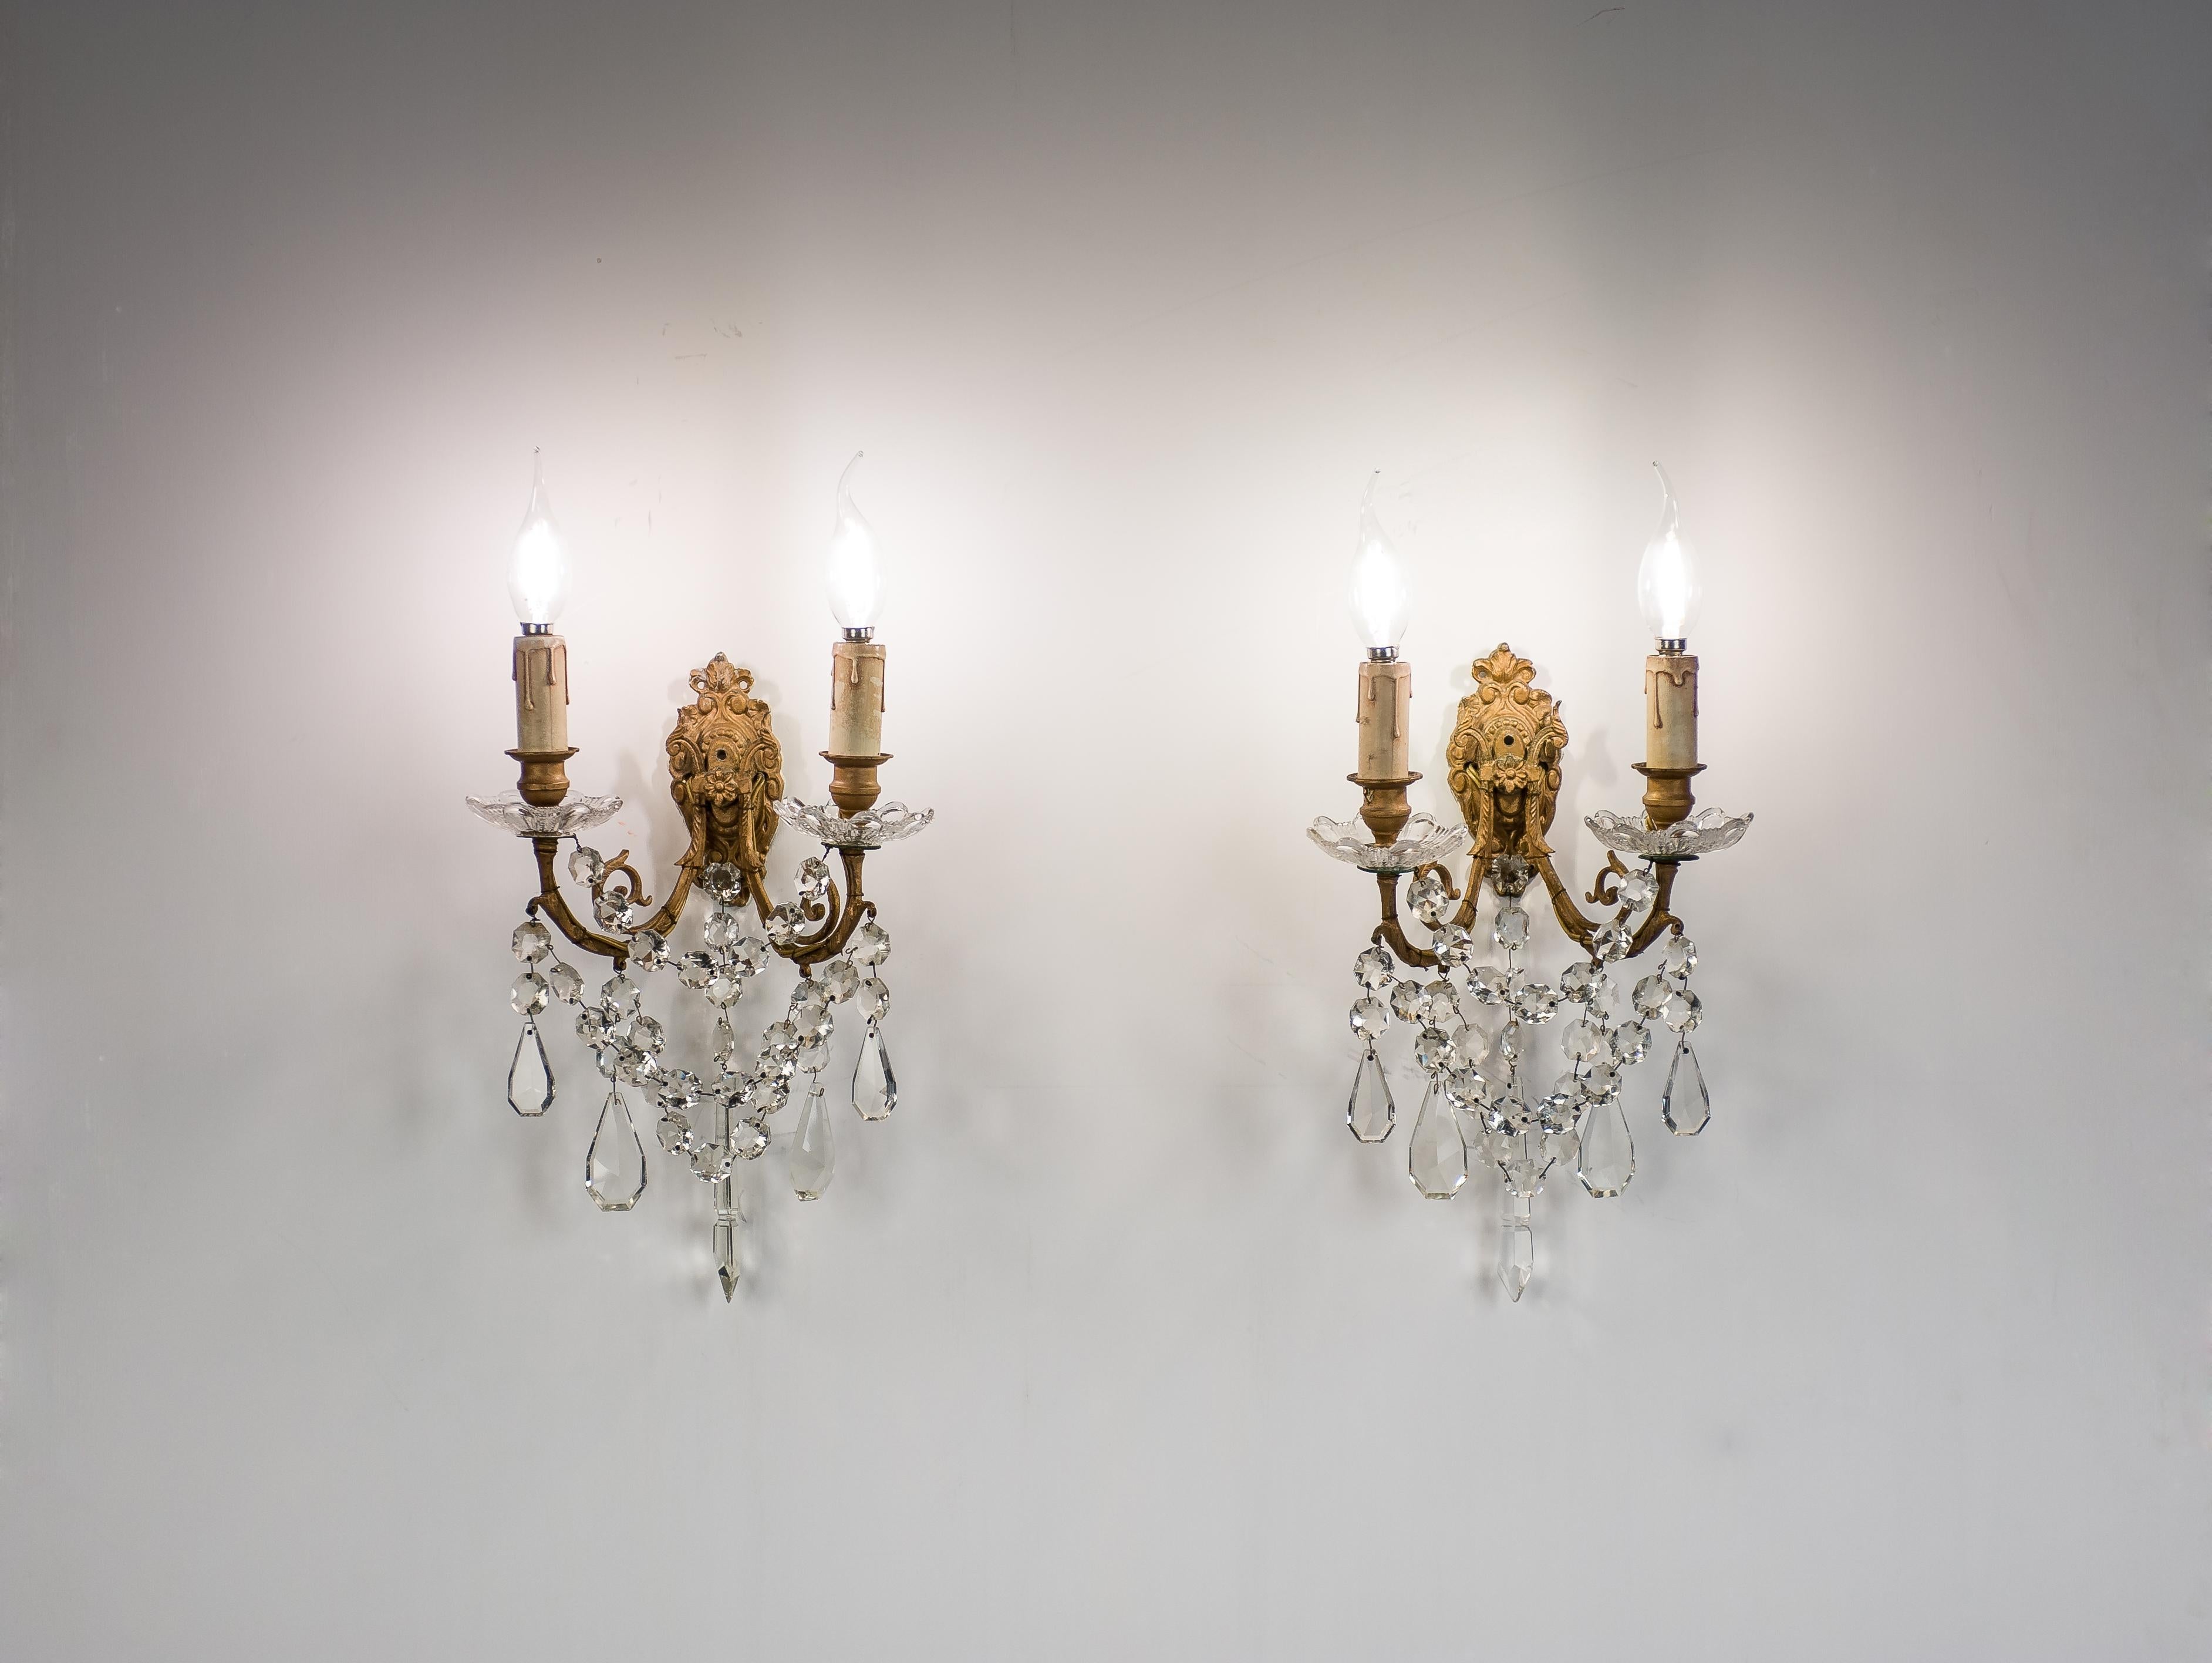 On offer here is a beautiful pair of antique late 19th-century wall sconces that were made in France circa 1880. The sconces feature a cast brass frame hung with baccarat crystal ornaments. This elegant baroque-style sconce features two scrolled